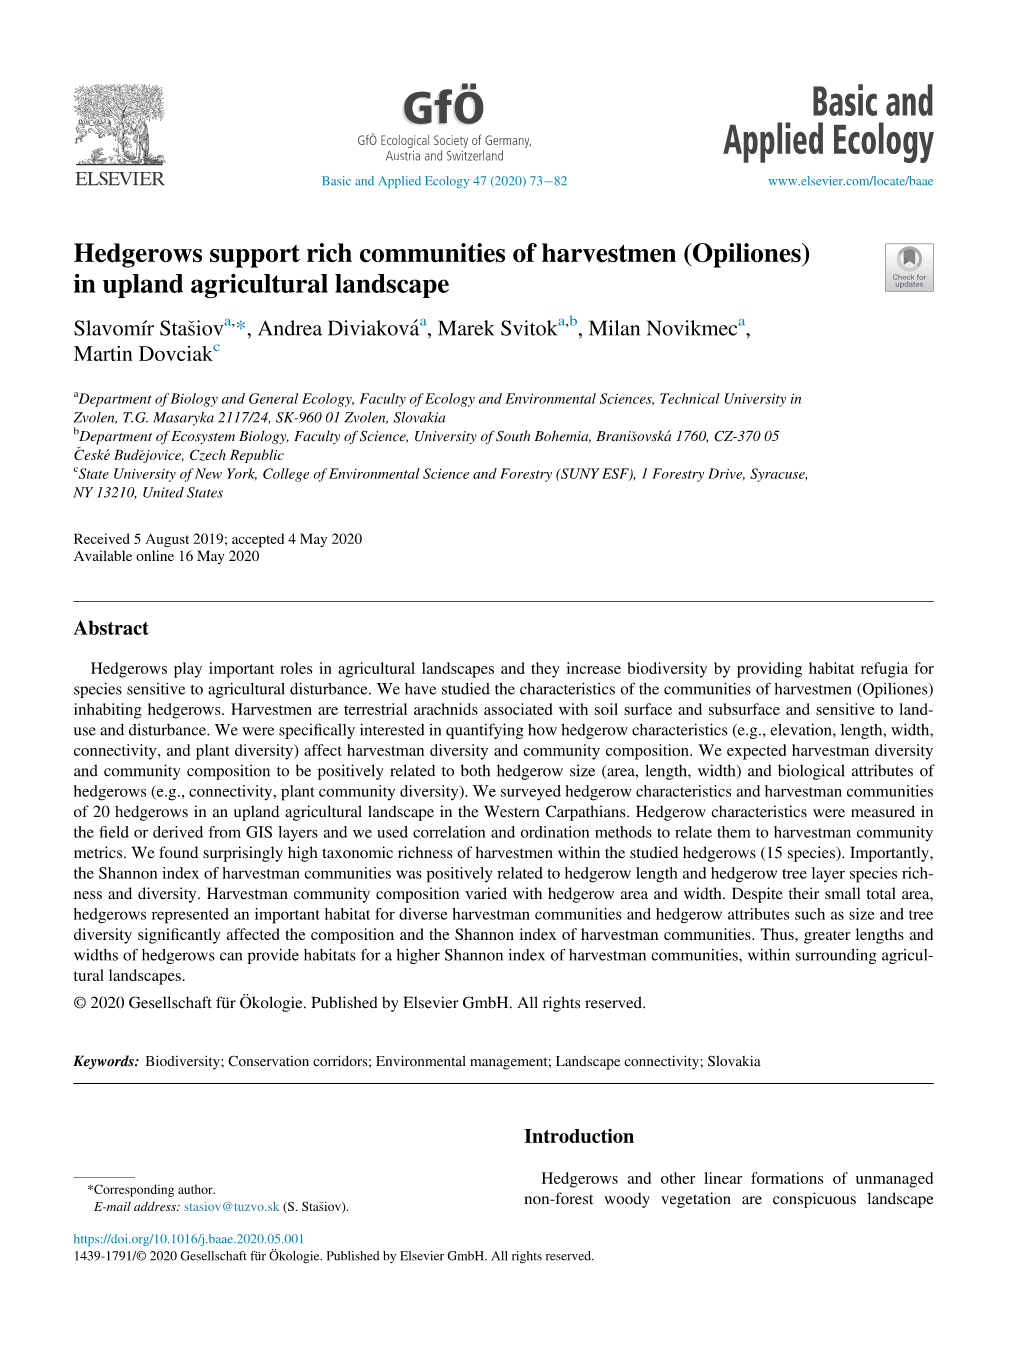 Hedgerows Support Rich Communities of Harvestmen (Opiliones) in Upland Agricultural Landscape